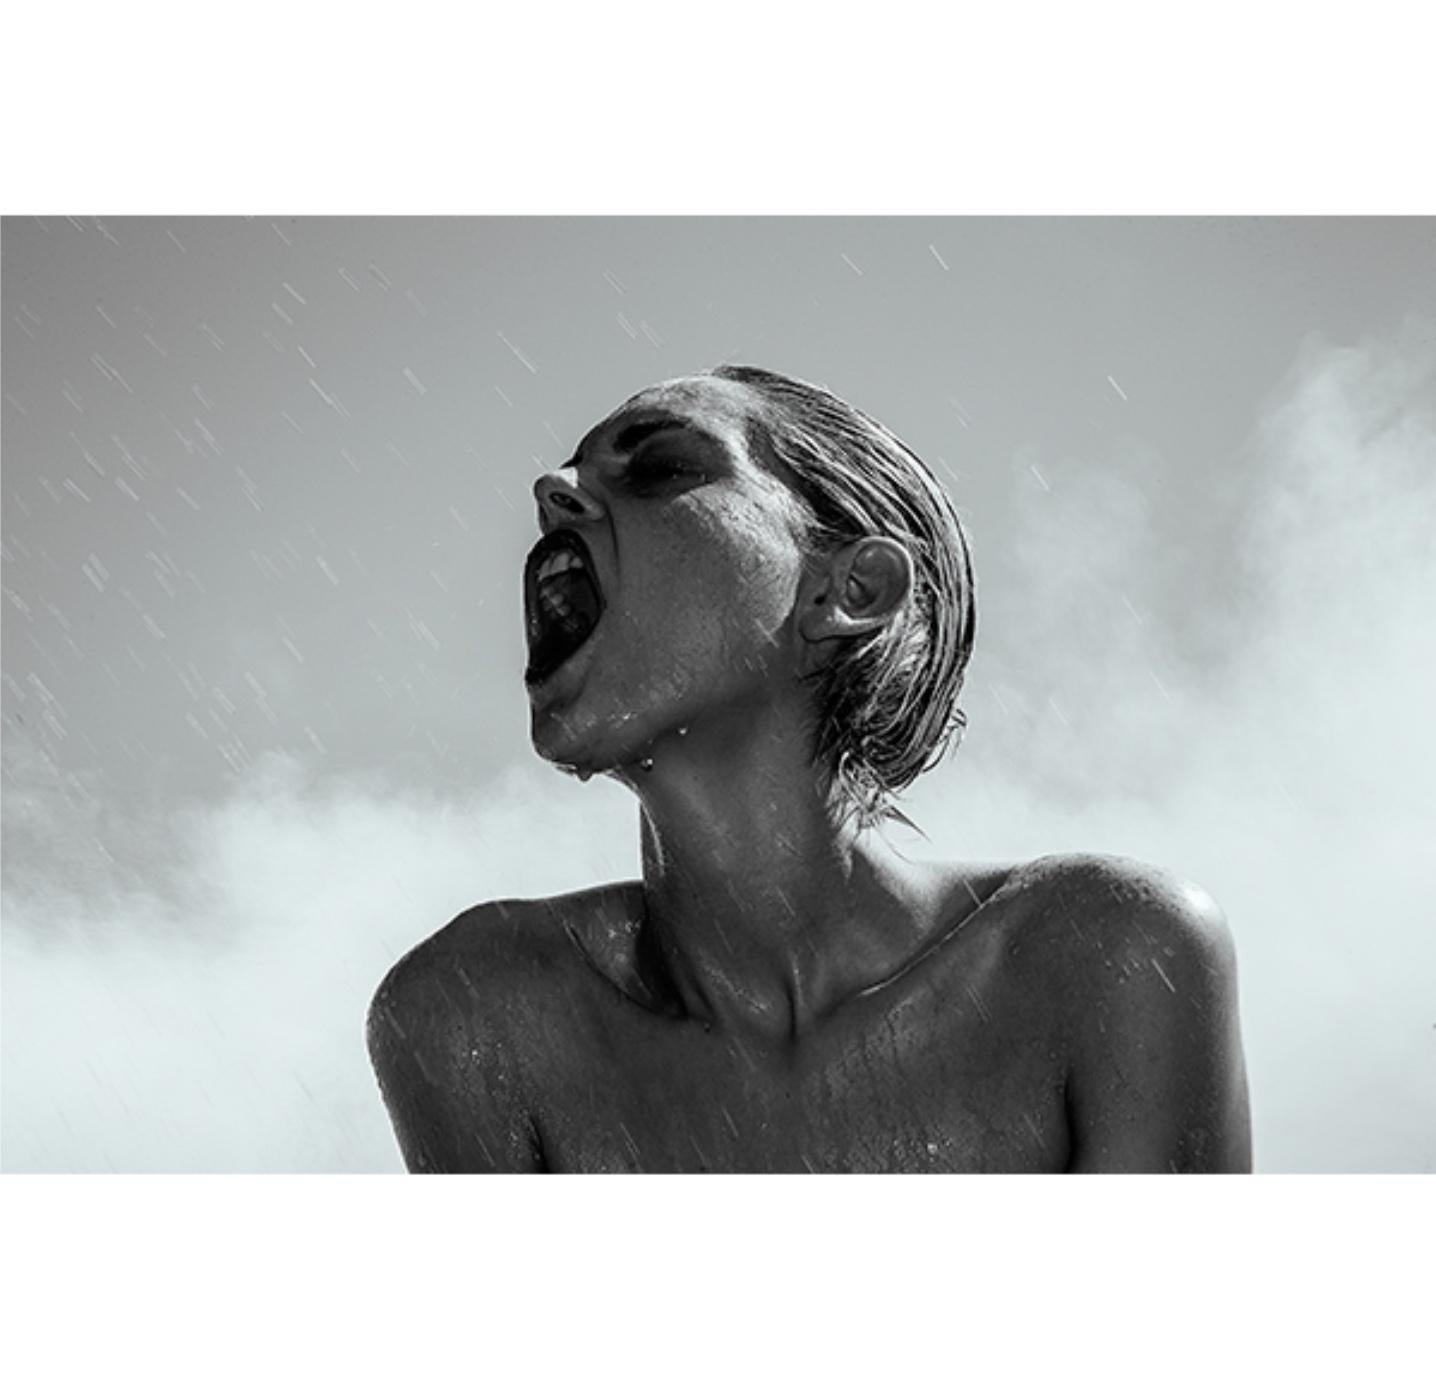 Tyler Shields - Pouring Rain, Photography 2014, Printed After